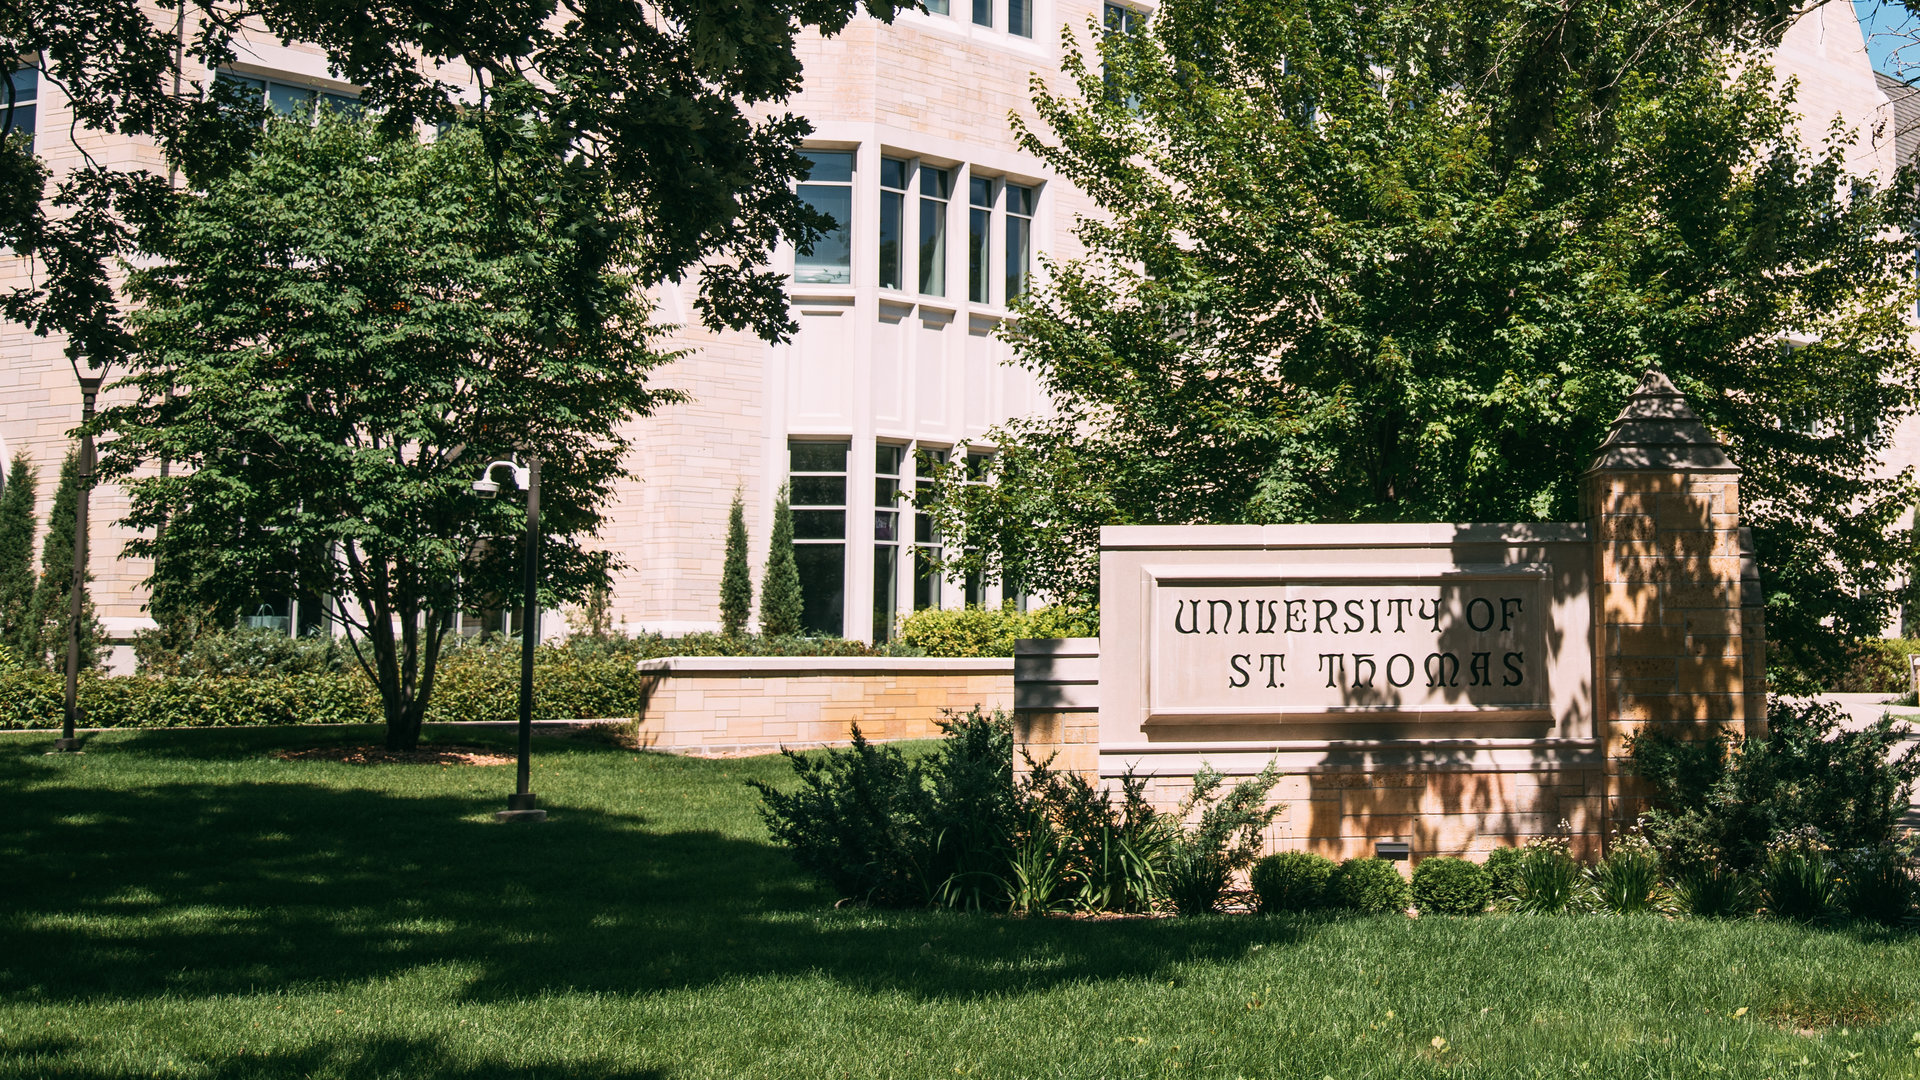 University of St. Thomas sign outside the Anderson Student Center in St. Paul